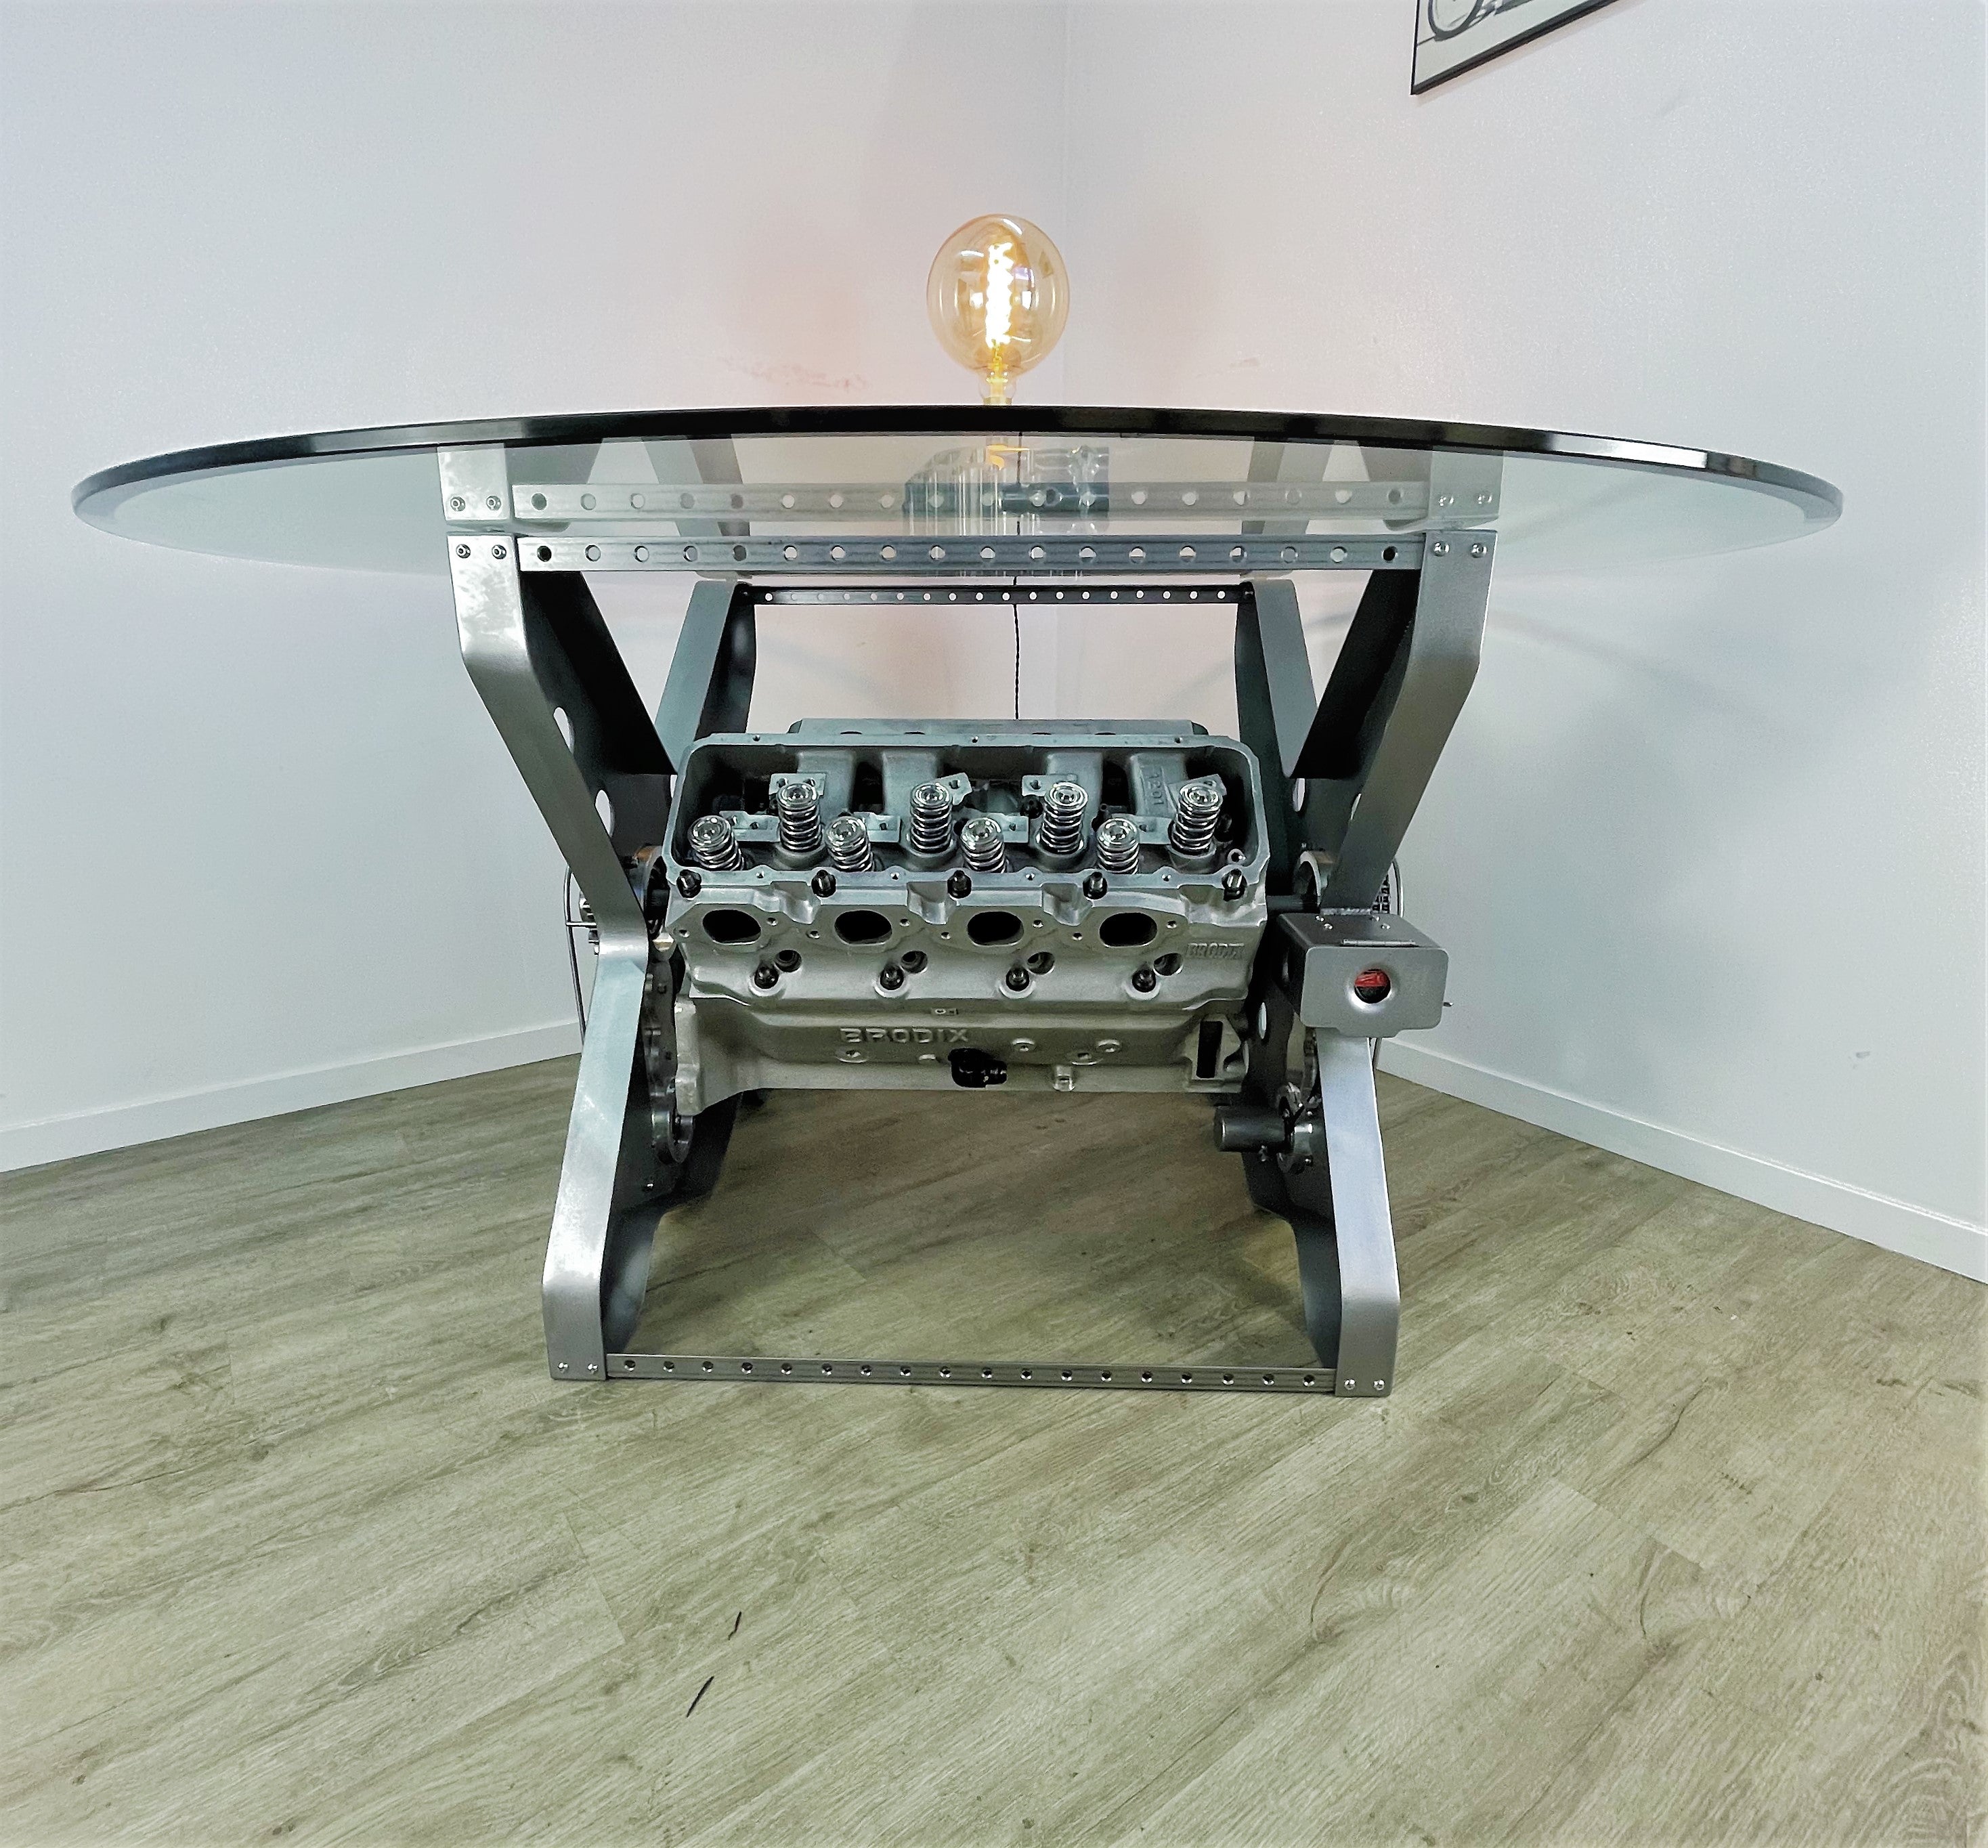 X-frame rotating engine dining table with a round glass top and car part lamp on top.